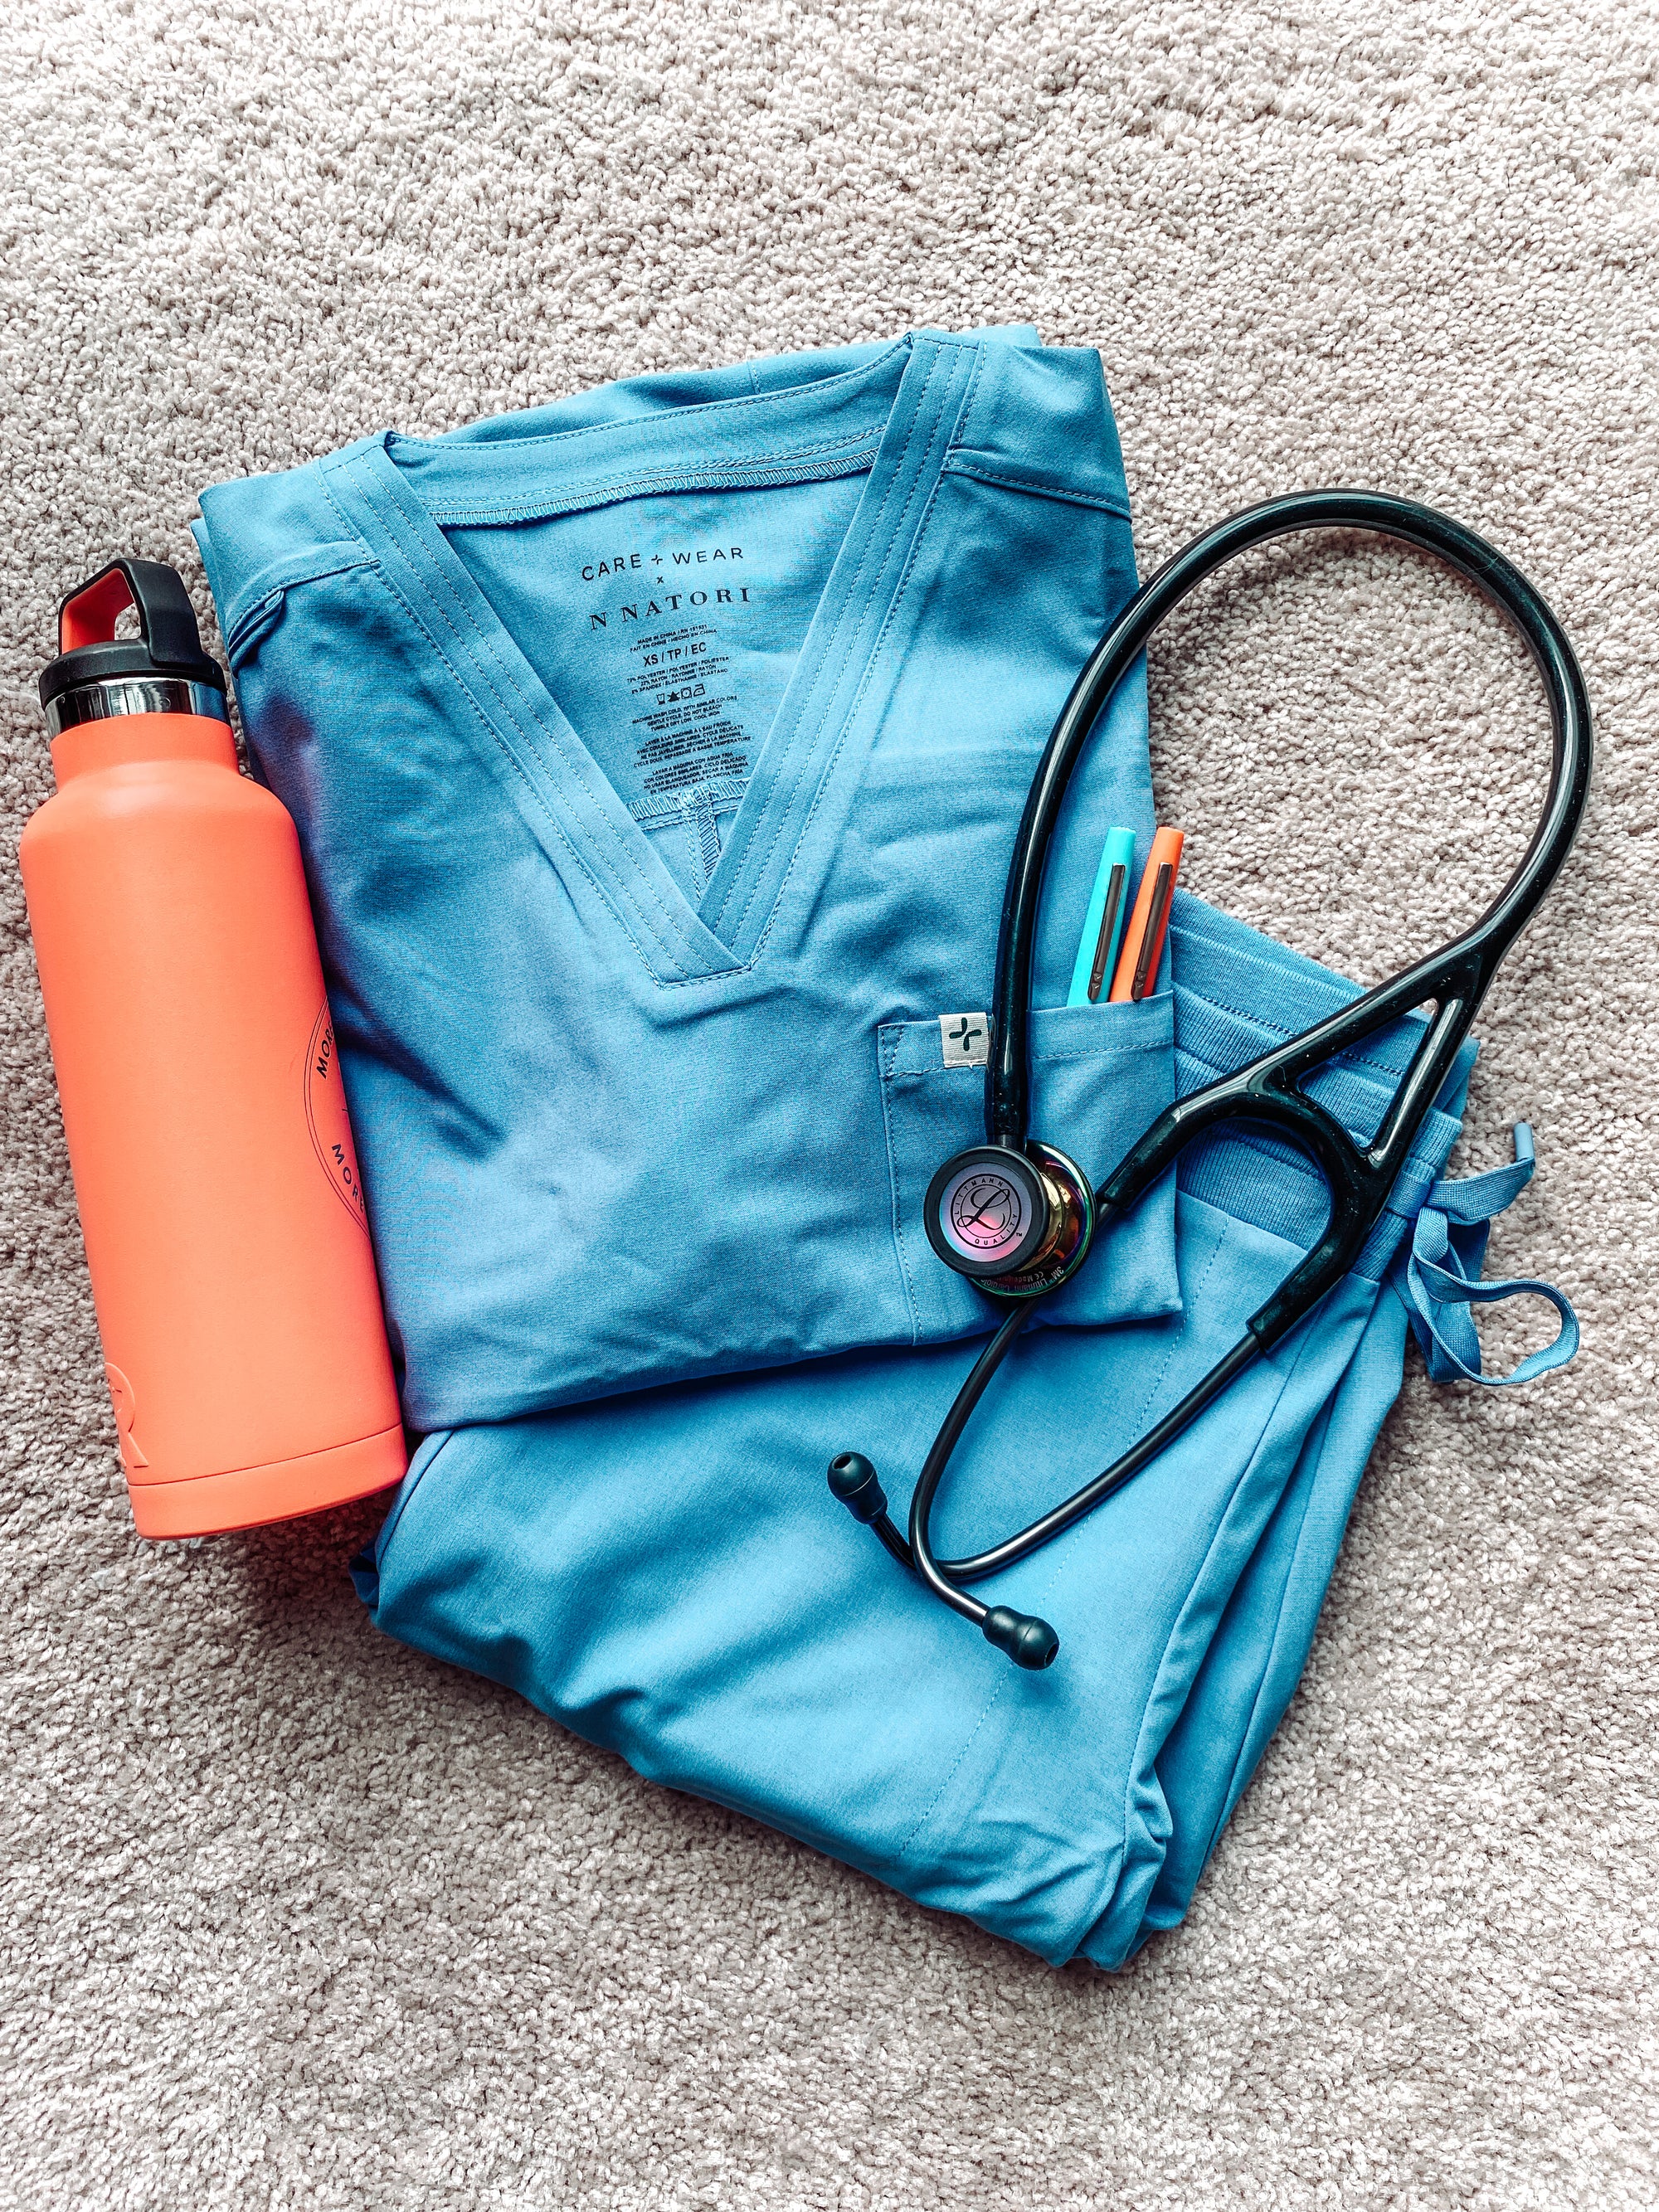 10 Essential Gifts For Nursing Students And New Nurses